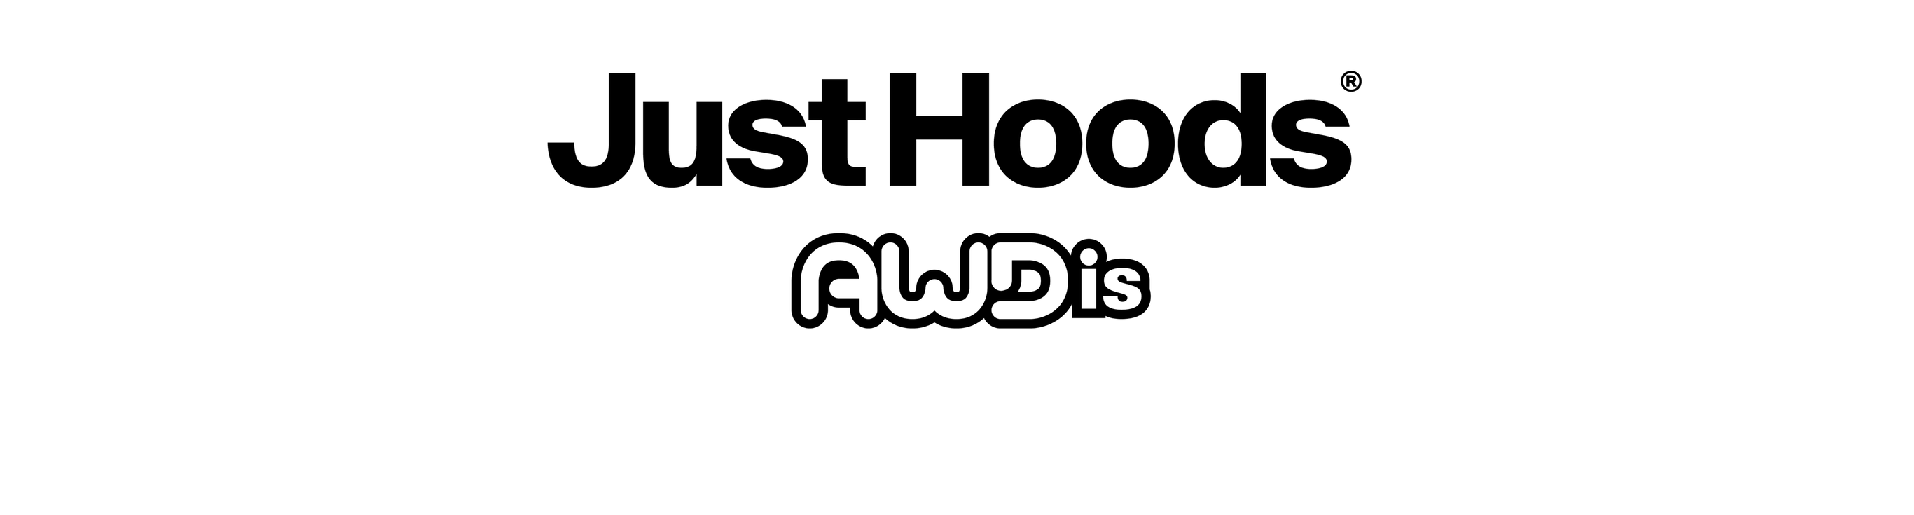 Vêtements Just Hoods By Awdis | Mes Tenues Perso